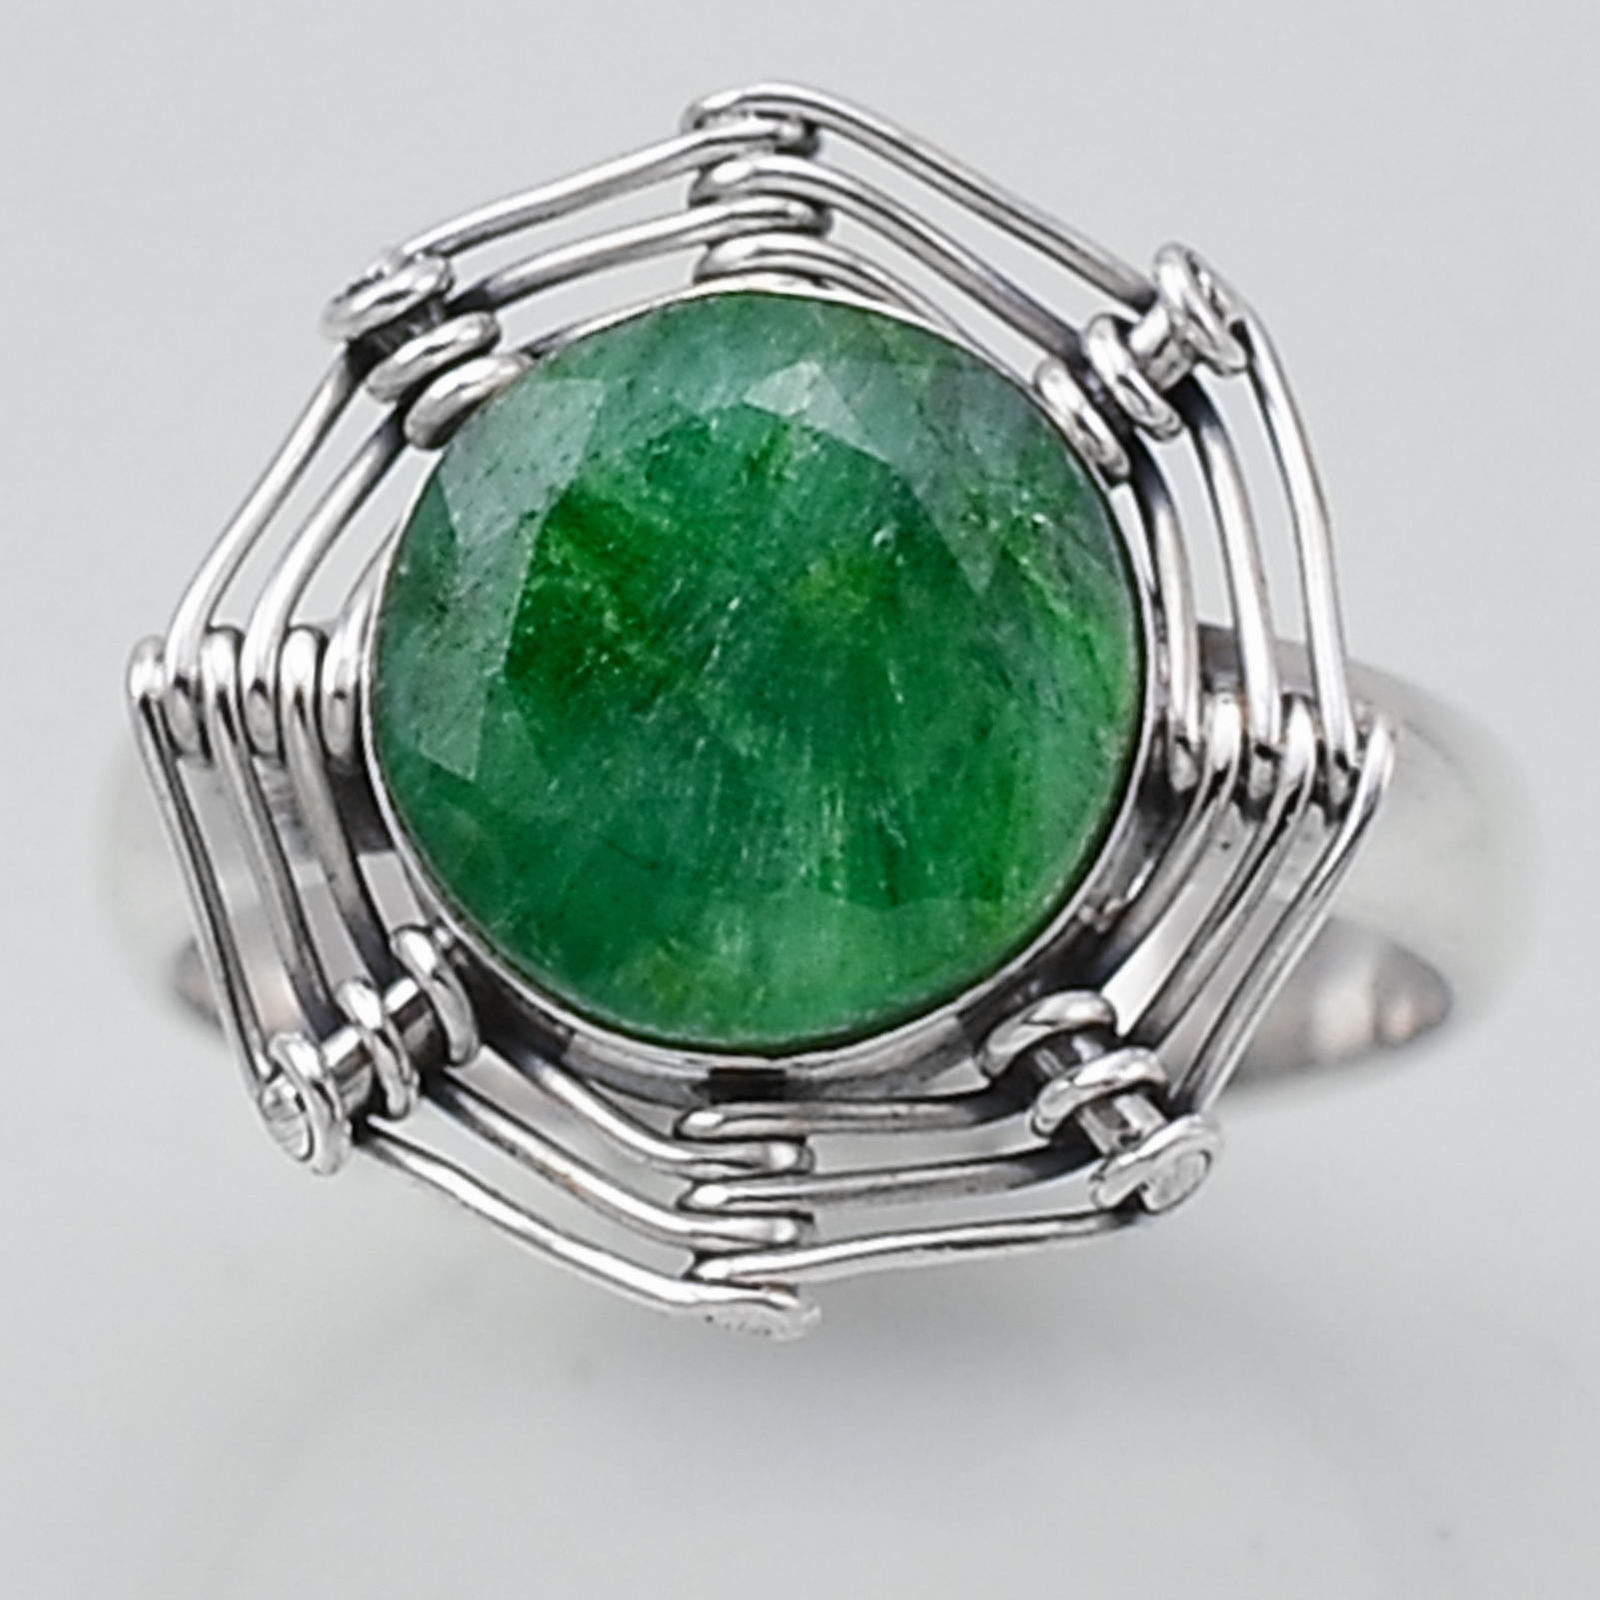  Sale, Indian Emerald Ring, Size 7 US or O for UK, 925 Silver, Handmade - $28.00